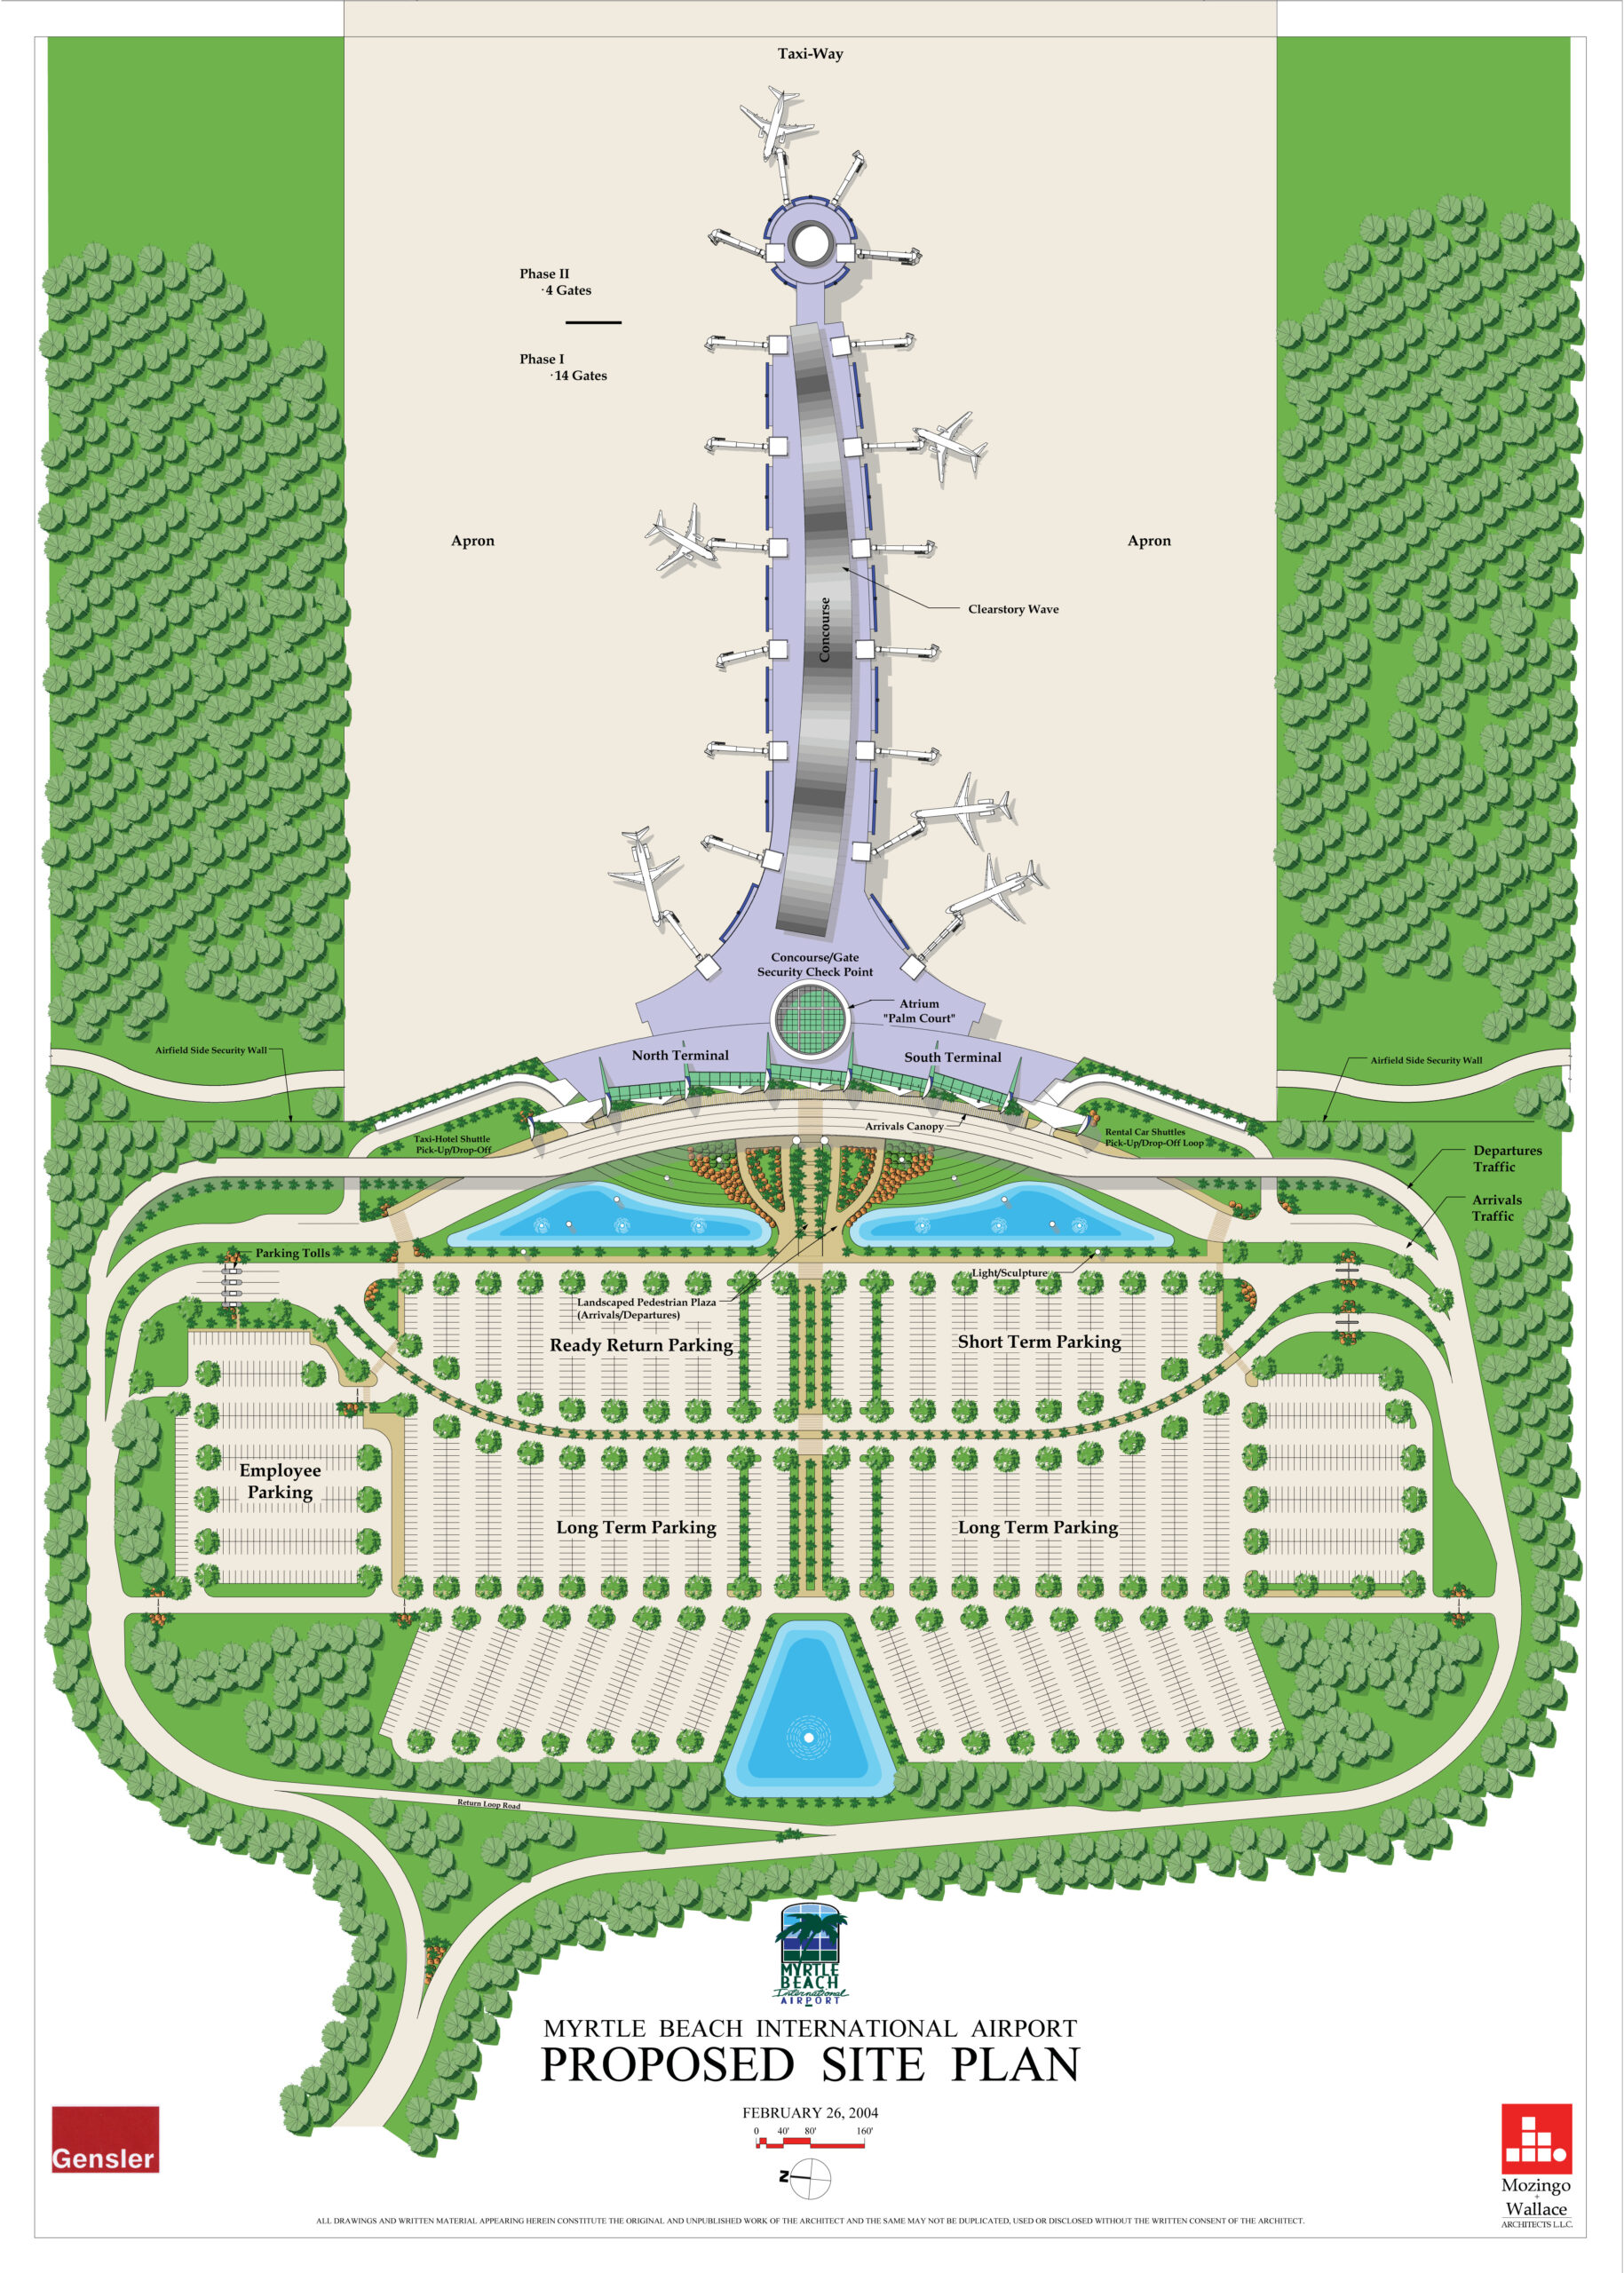 04 020 MB INT AIRPORT SITE PLAN 10 05 11 Scaled 